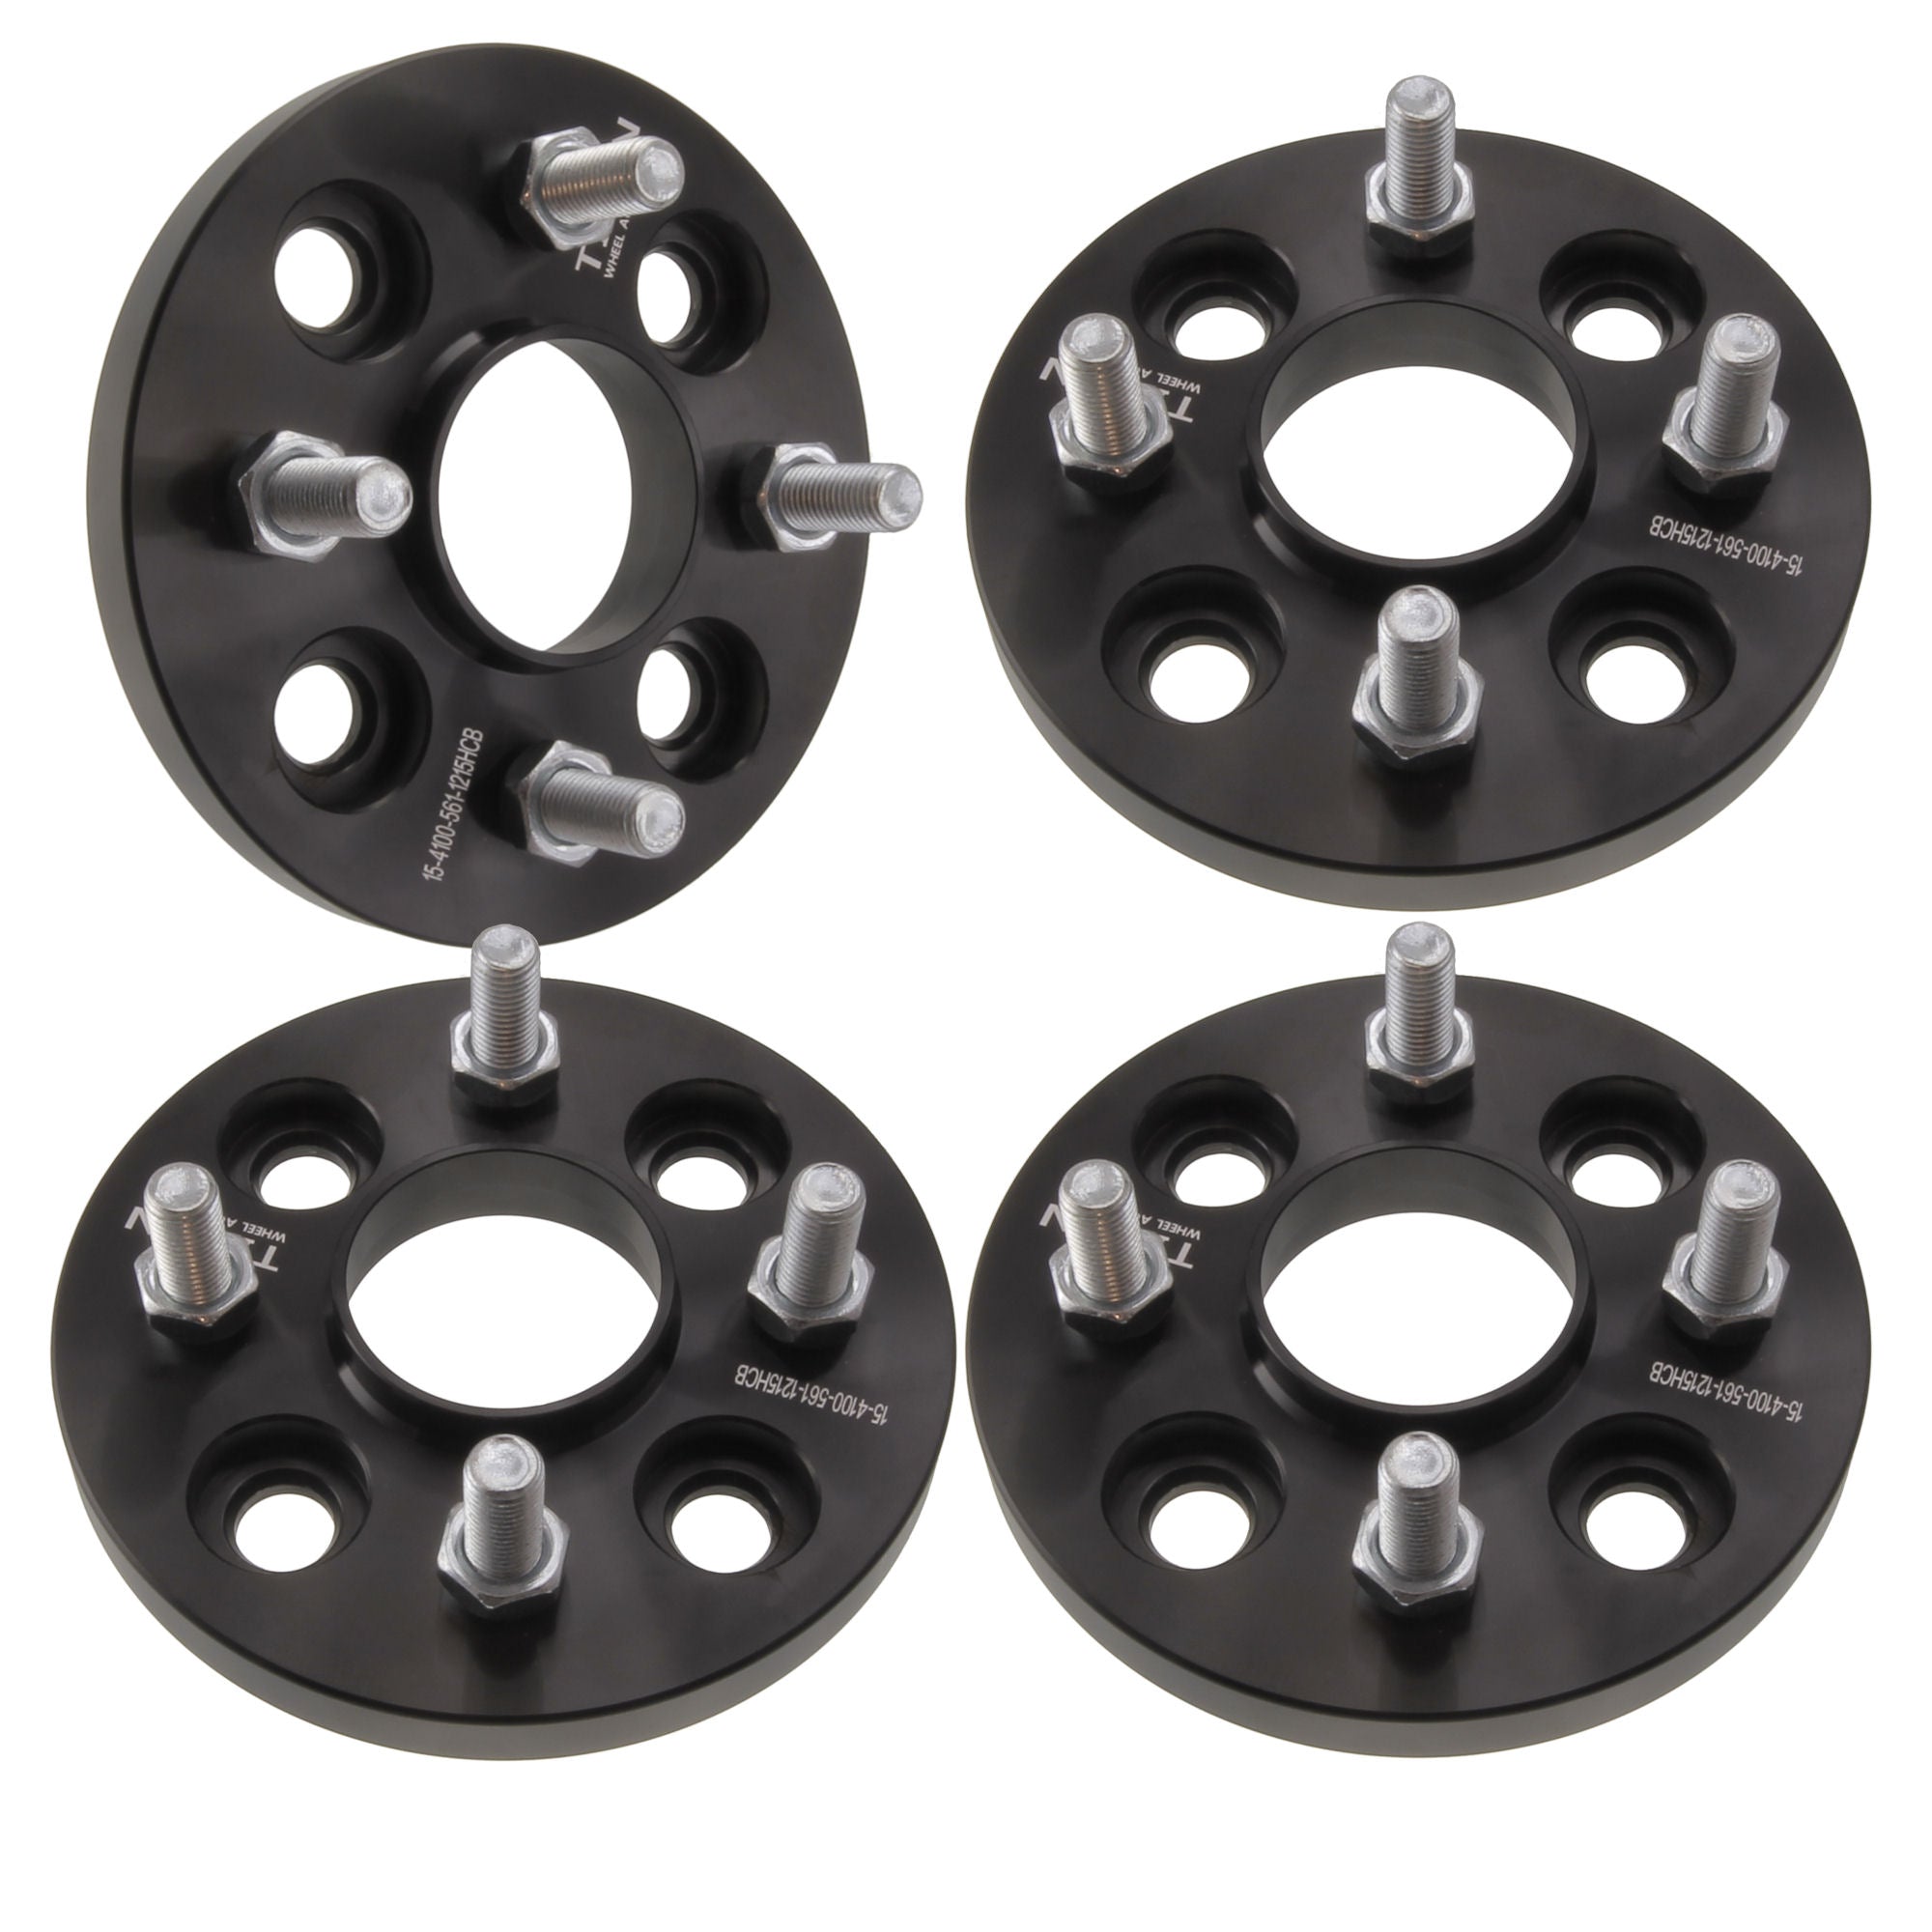 15mm Hubcentric Wheel Spacers for Nissan Infiniti | 5x114.3 | 12x1